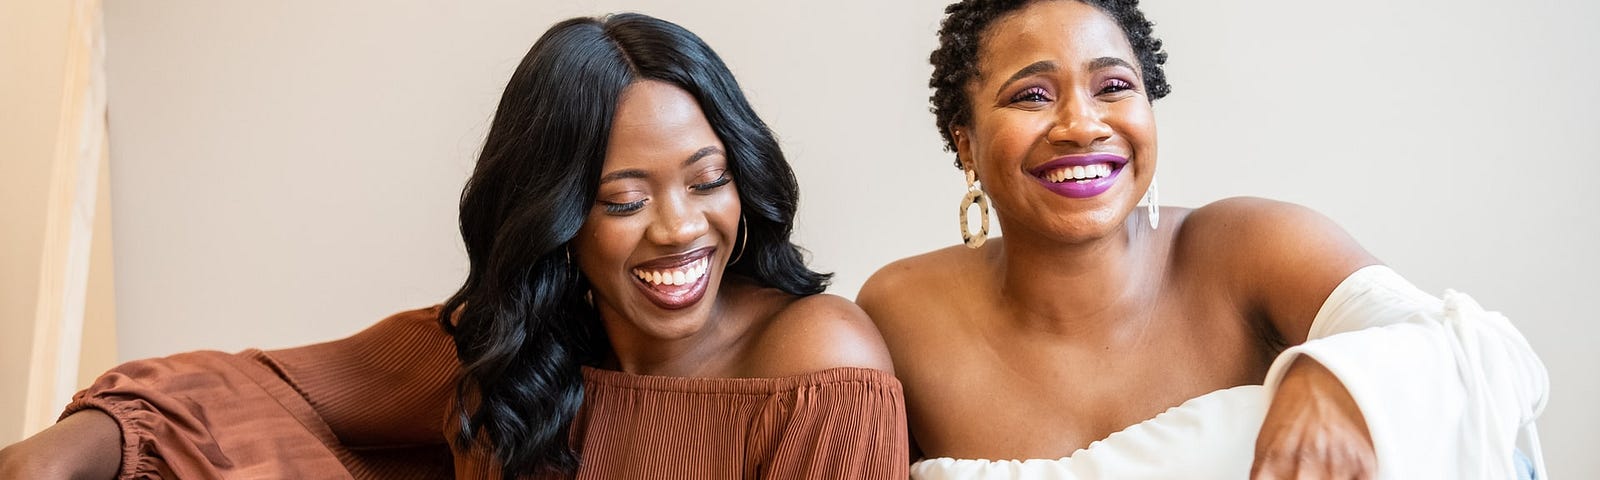 Two black women laughing together